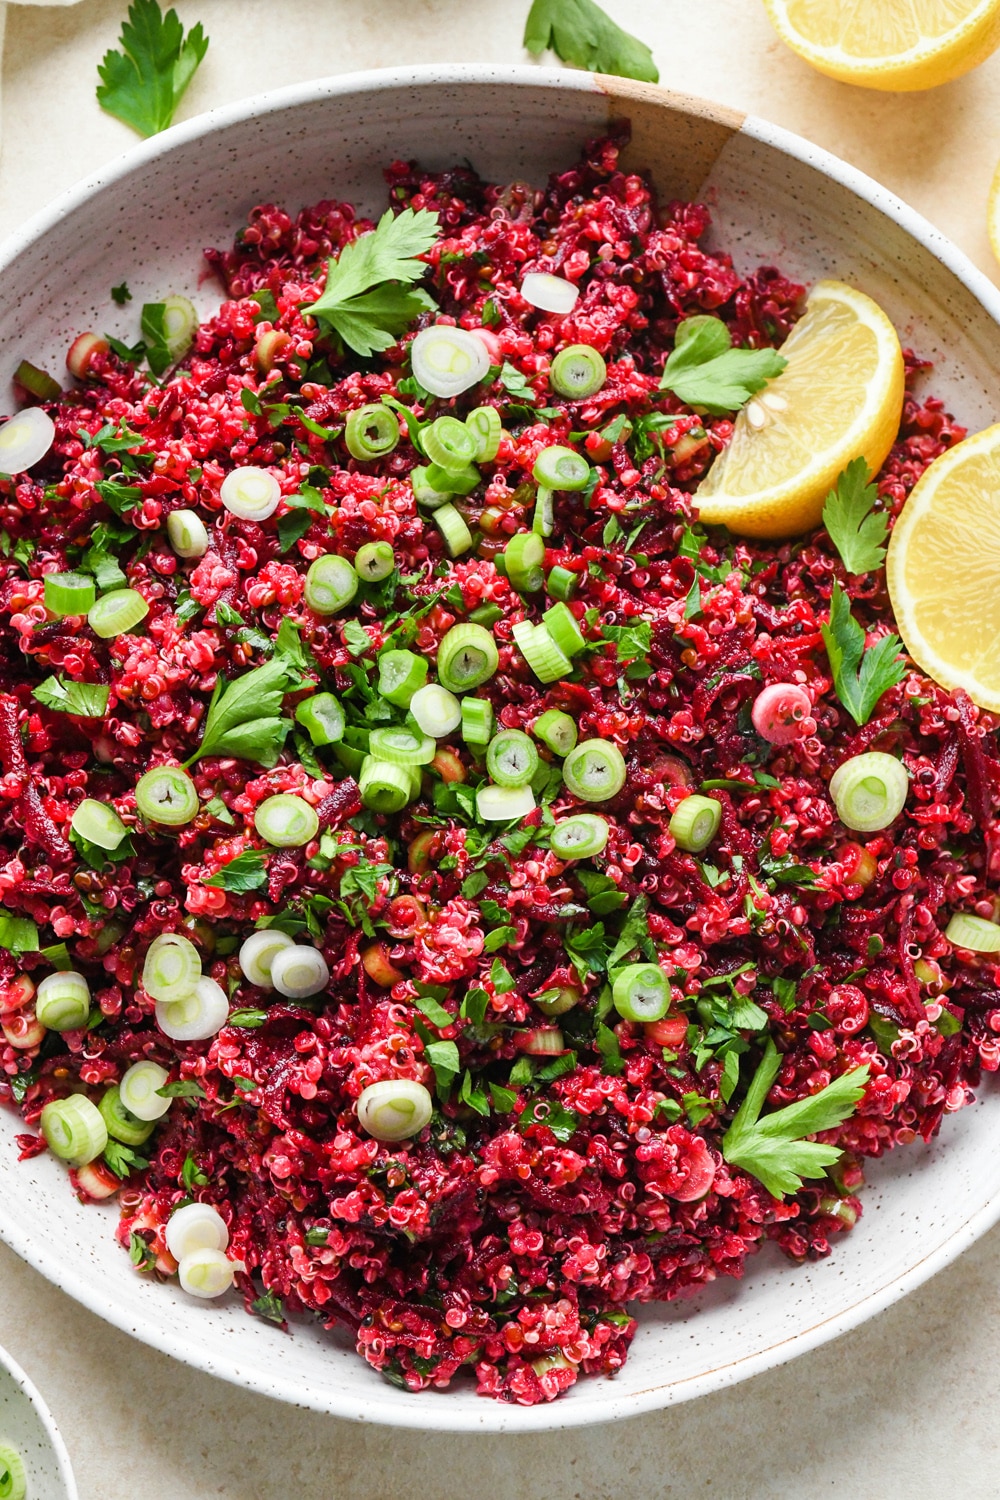 How to make quinoa and fresh beet salad: Deep pink quinoa salad in a large ceramic serving dish after garnishing with thinly sliced green onions, fresh parsley, and lemon wedges.